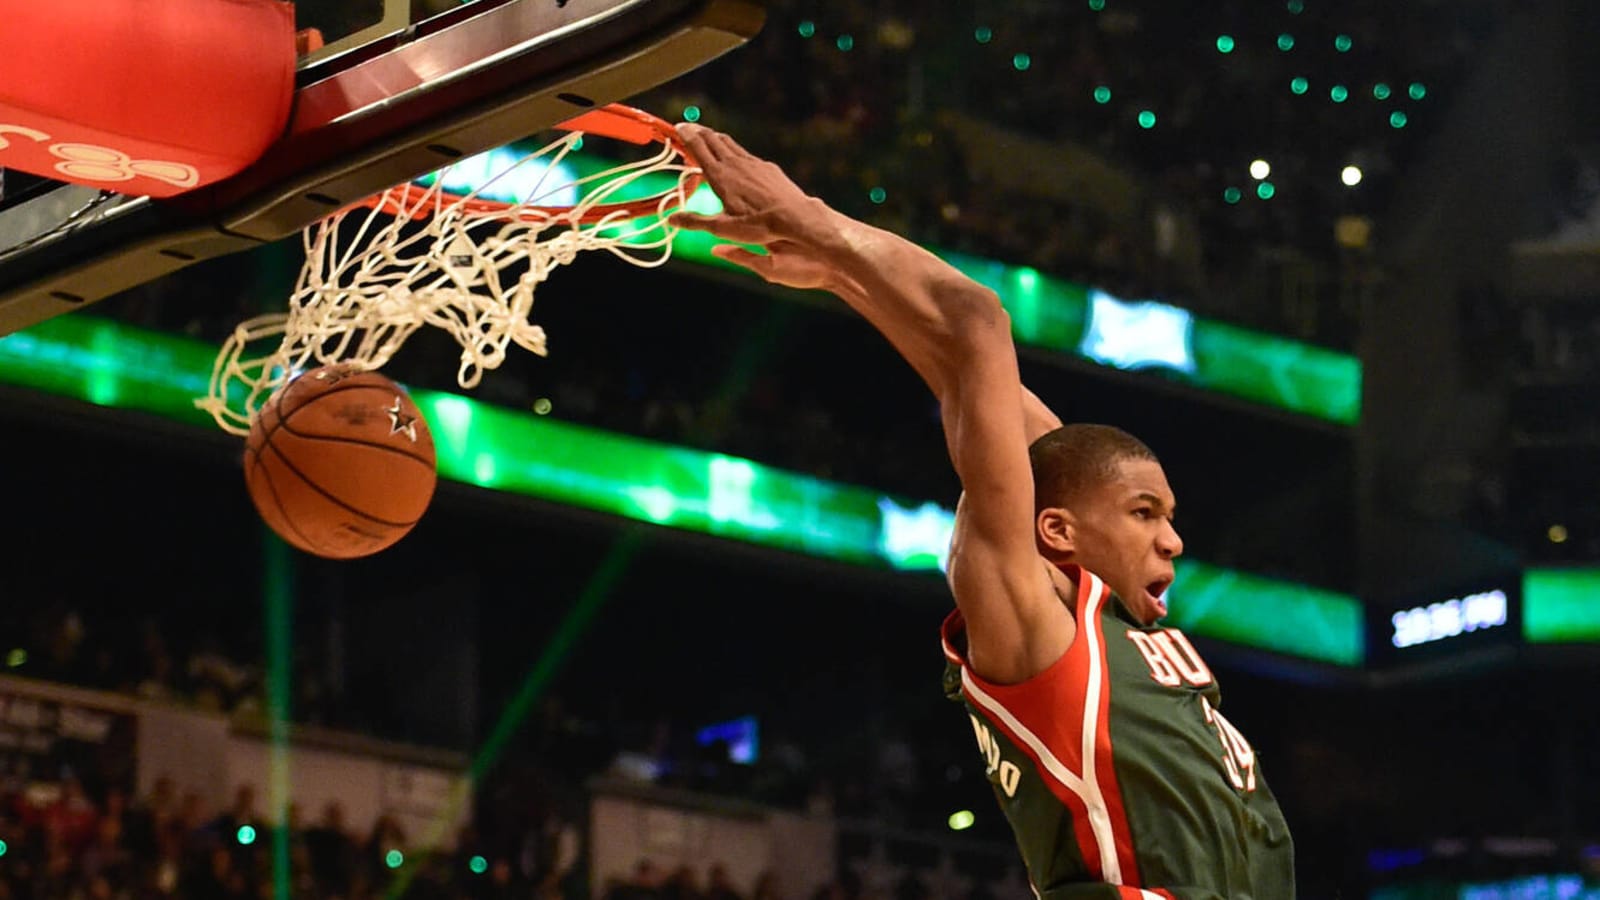 Looking back on Giannis Antetokounmpo in the 2015 Dunk Contest